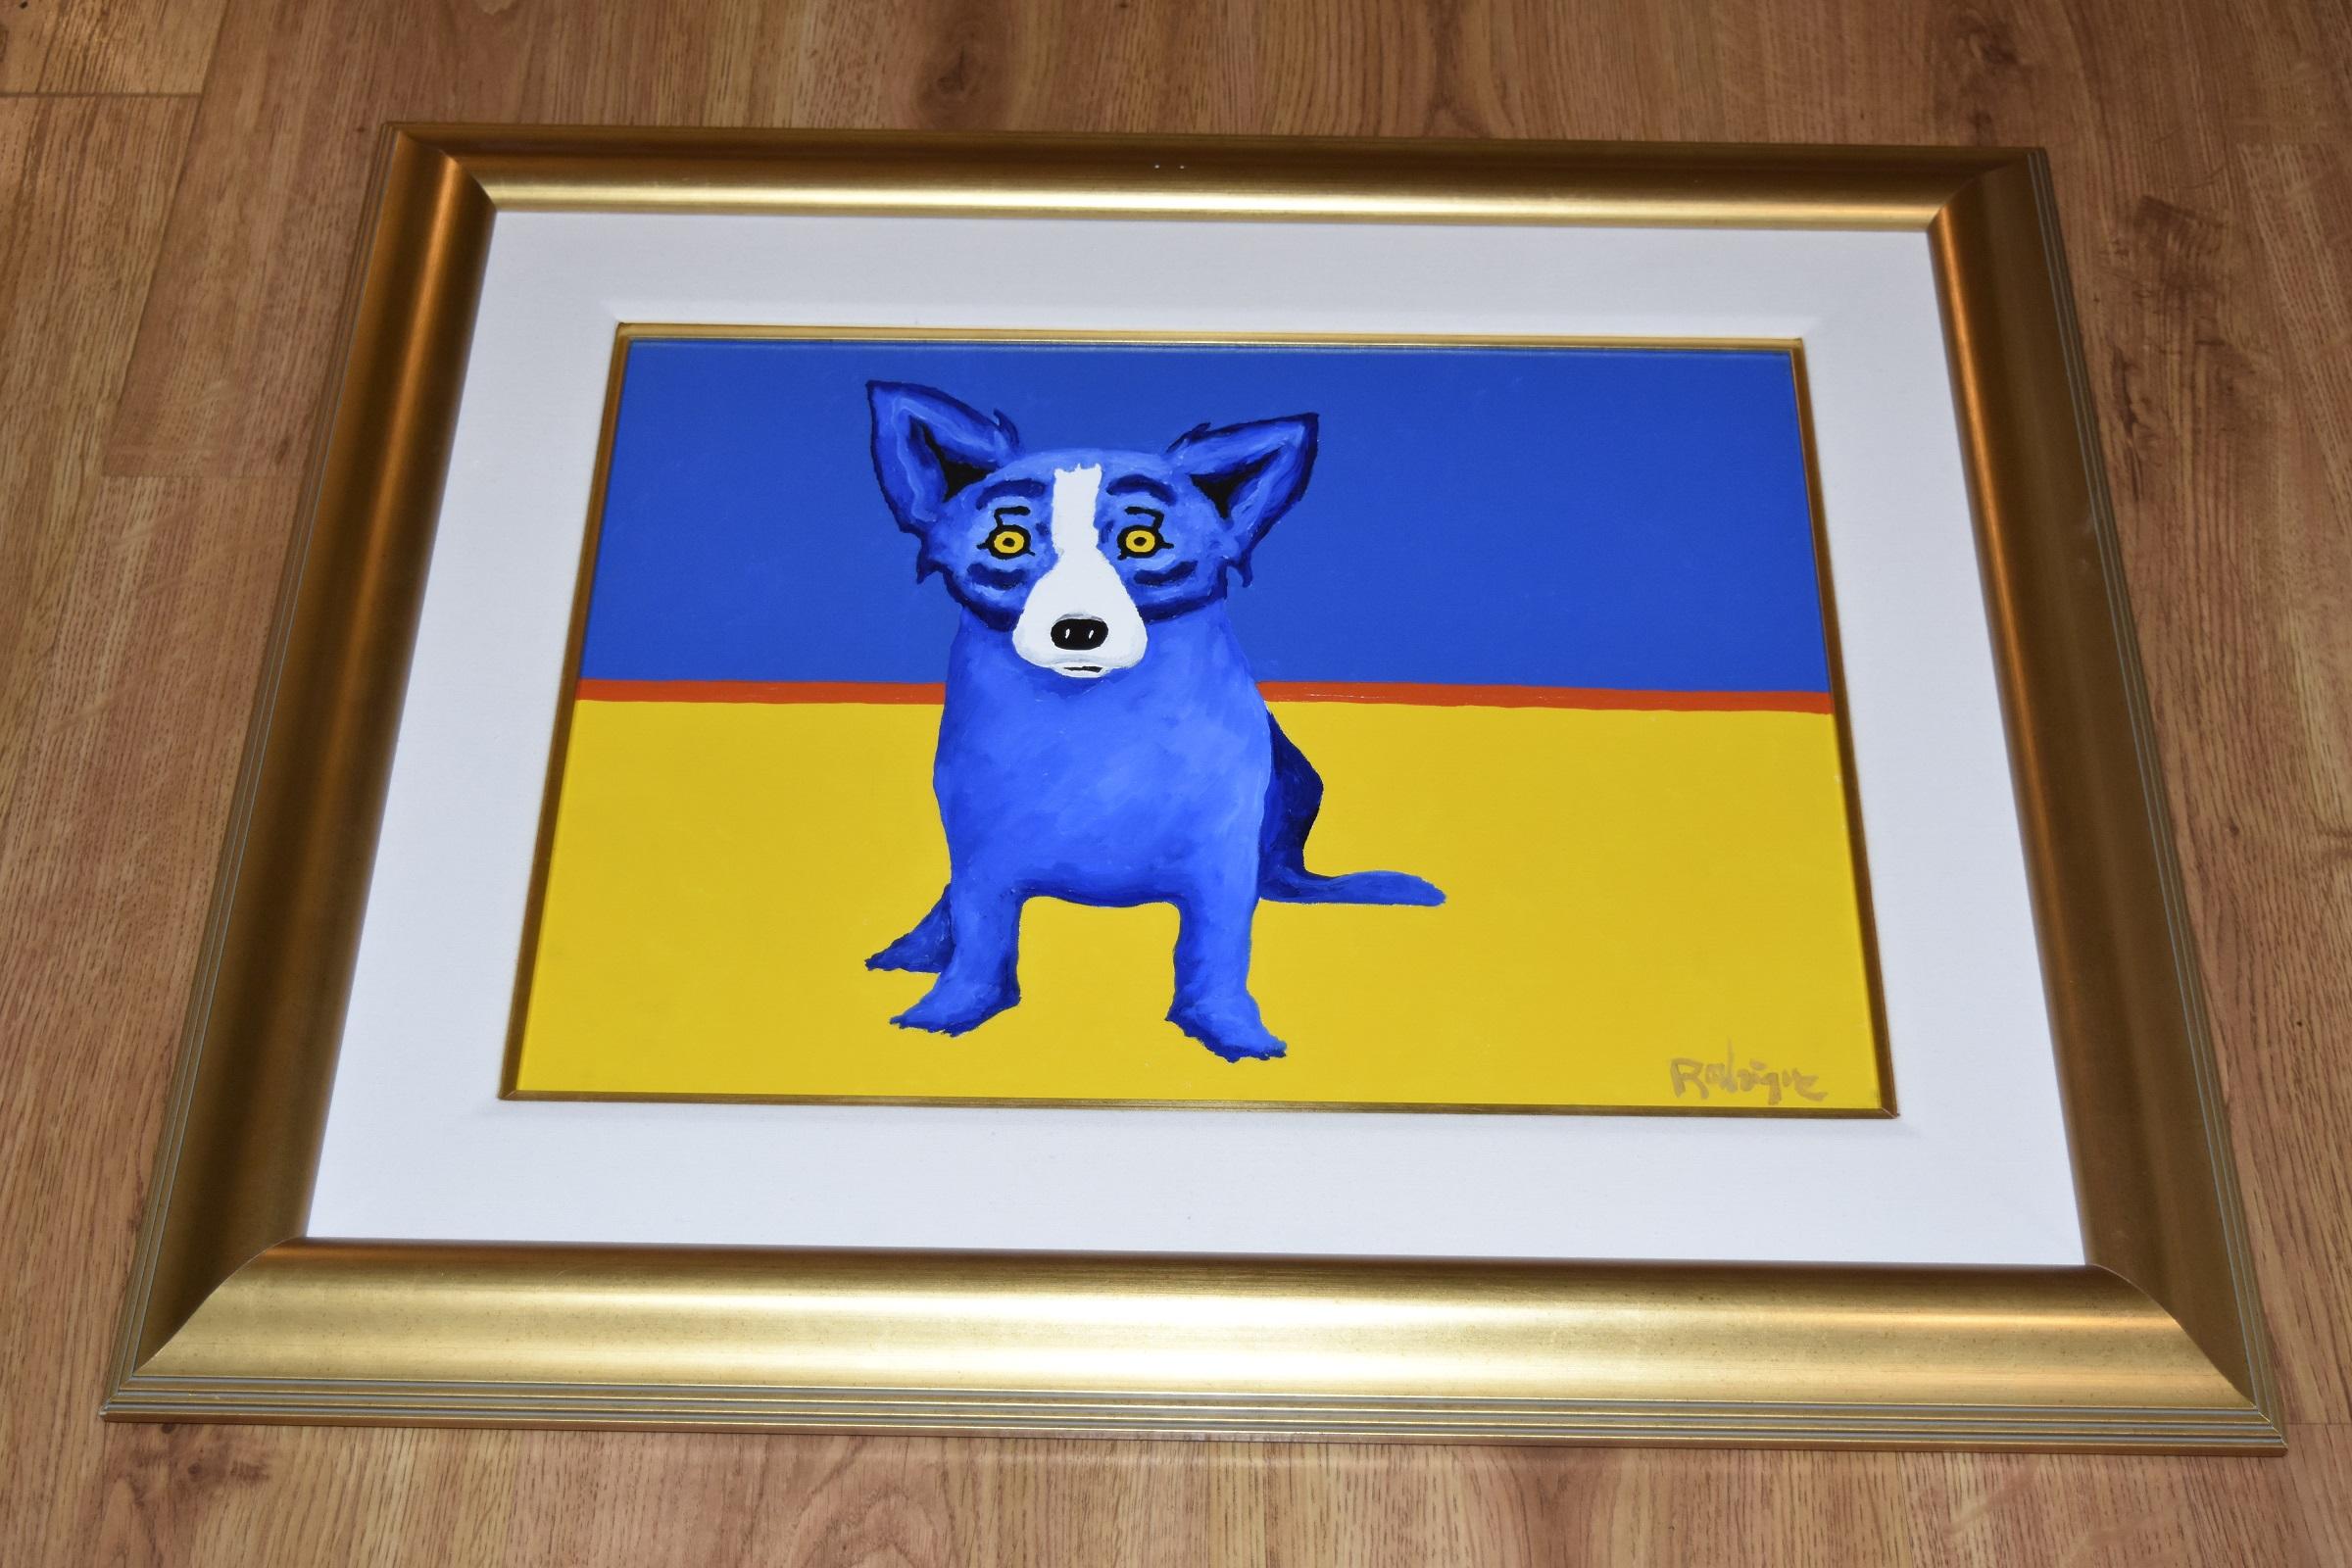 Original - There's a Fine Line Between Blue and Yellow - Signed Oil on Linen - Pop Art Painting by George Rodrigue